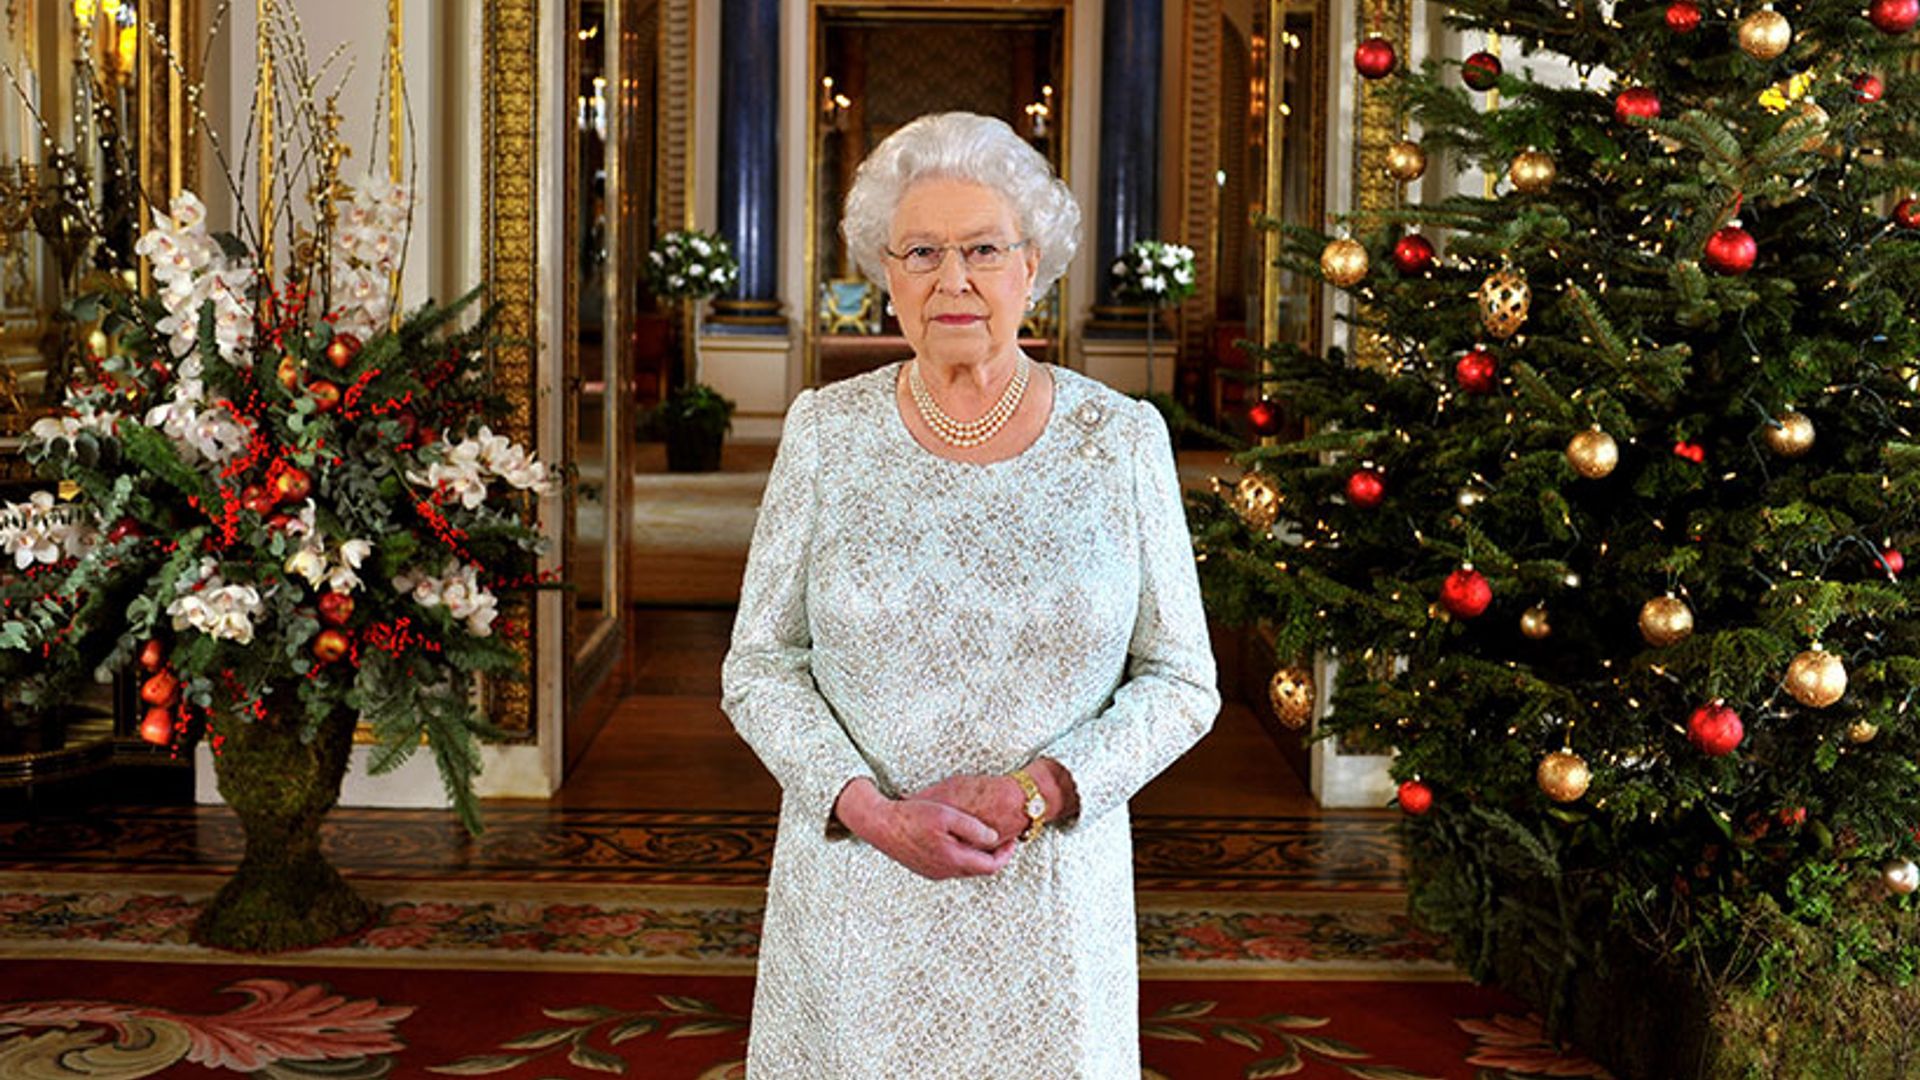 Find out who the Queen gives Christmas trees to EVERY year HELLO!